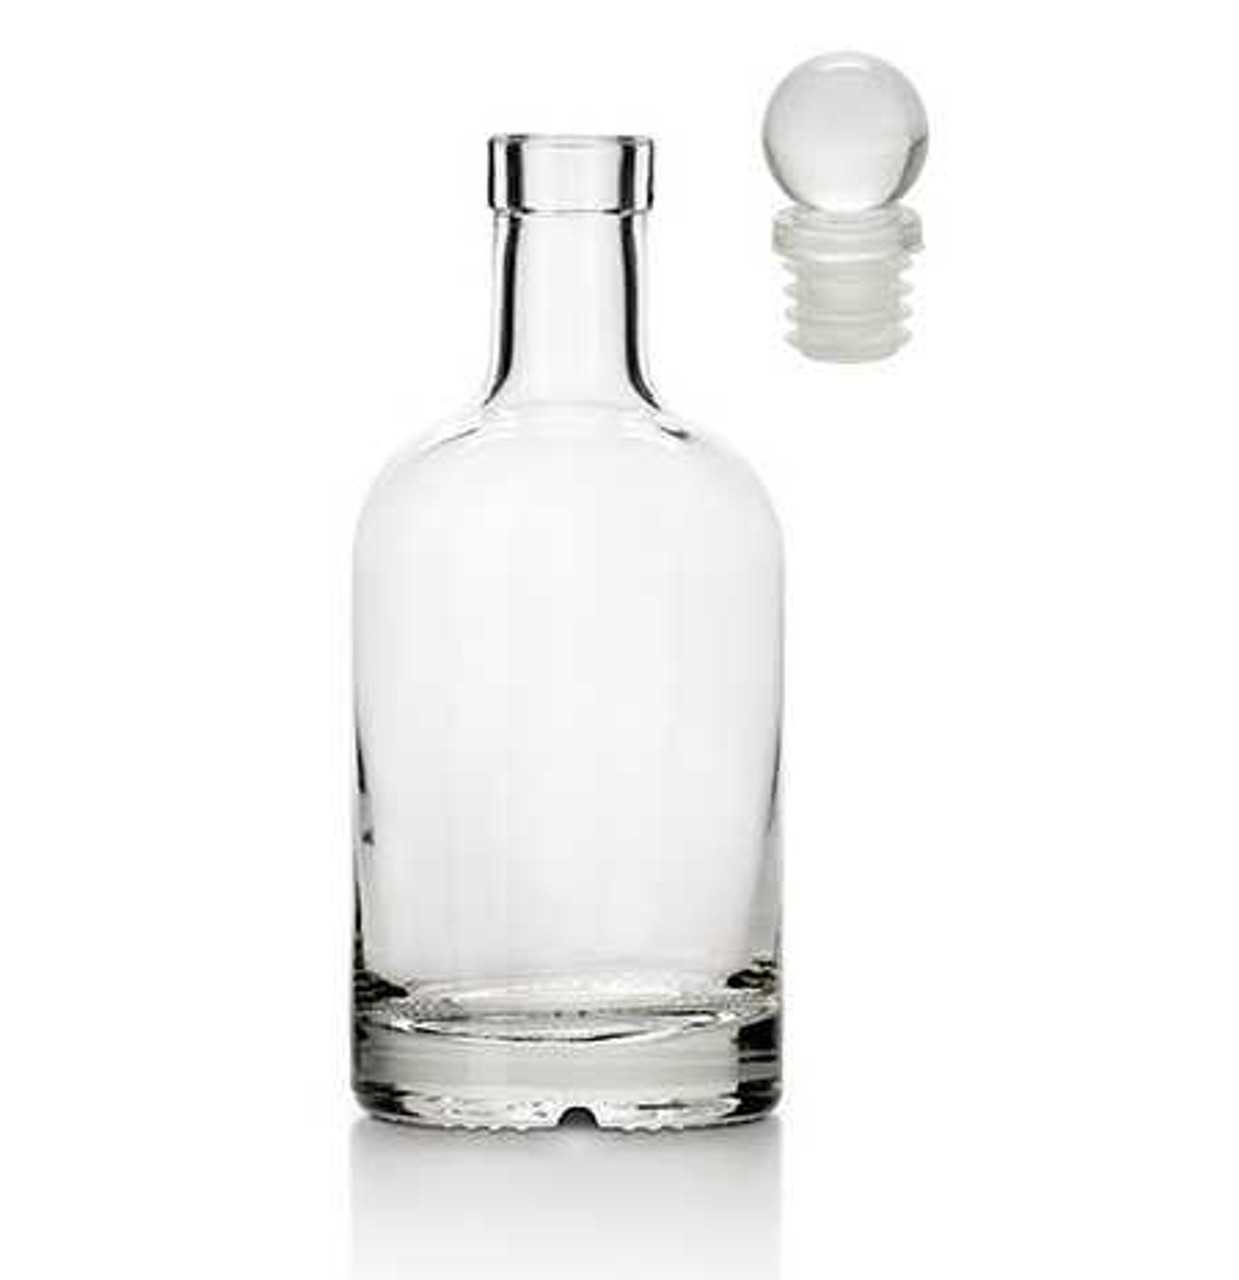 https://cdn11.bigcommerce.com/s-1ybtx/images/stencil/1280x1280/products/868/6103/12-oz-Nordic-Liquor-Bottle-with-Glass-Stoppers_2880__81482.1699988451.jpg?c=2?imbypass=on